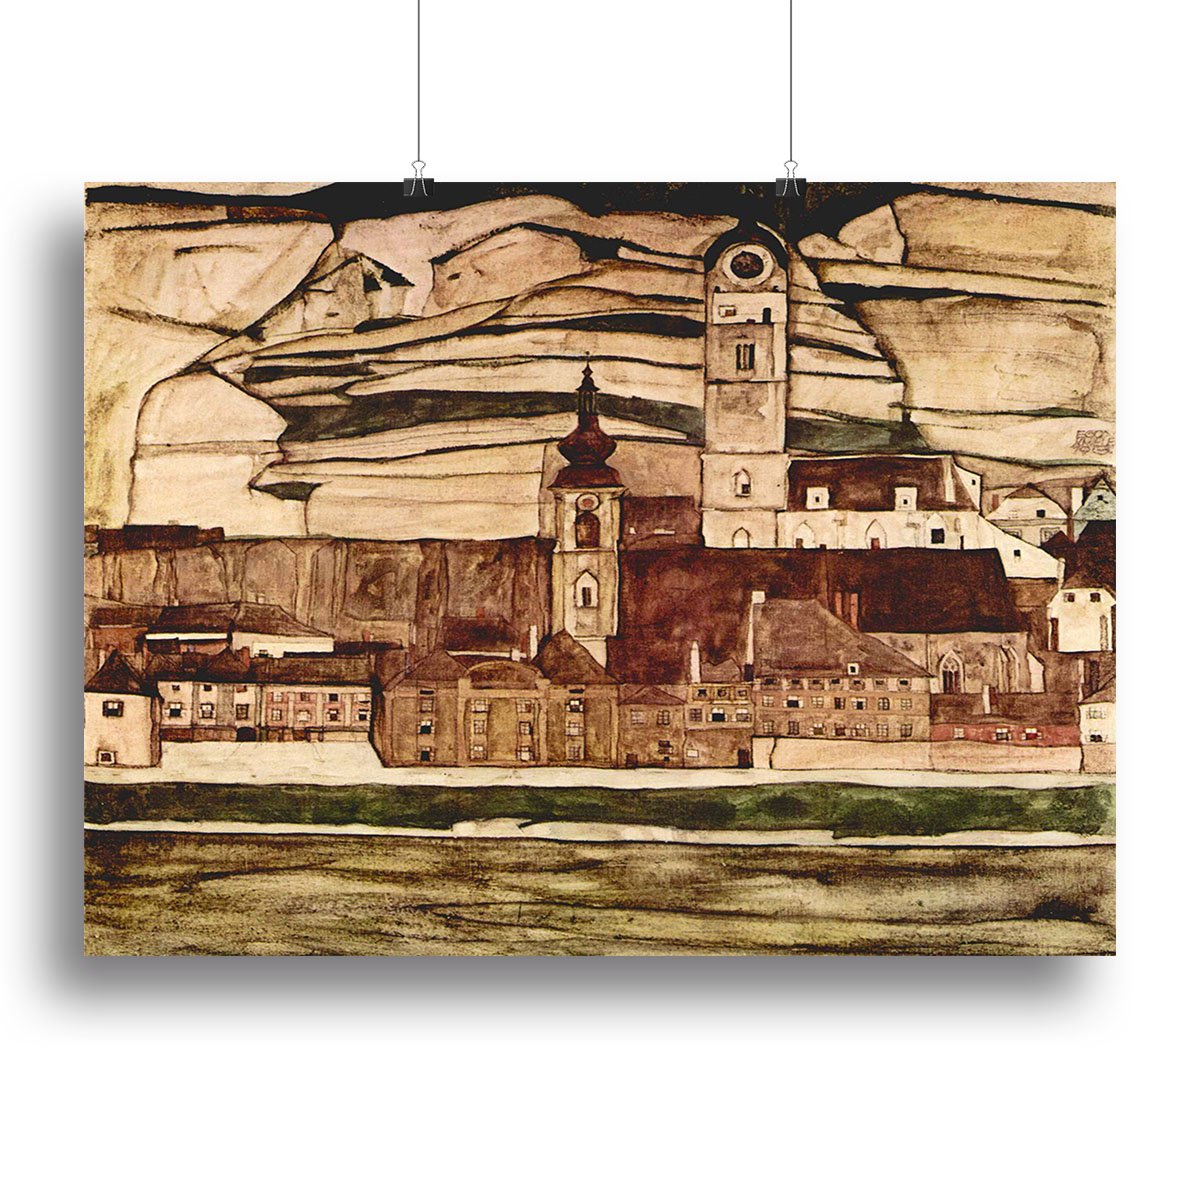 Stone on the Danube II by Egon Schiele Canvas Print or Poster